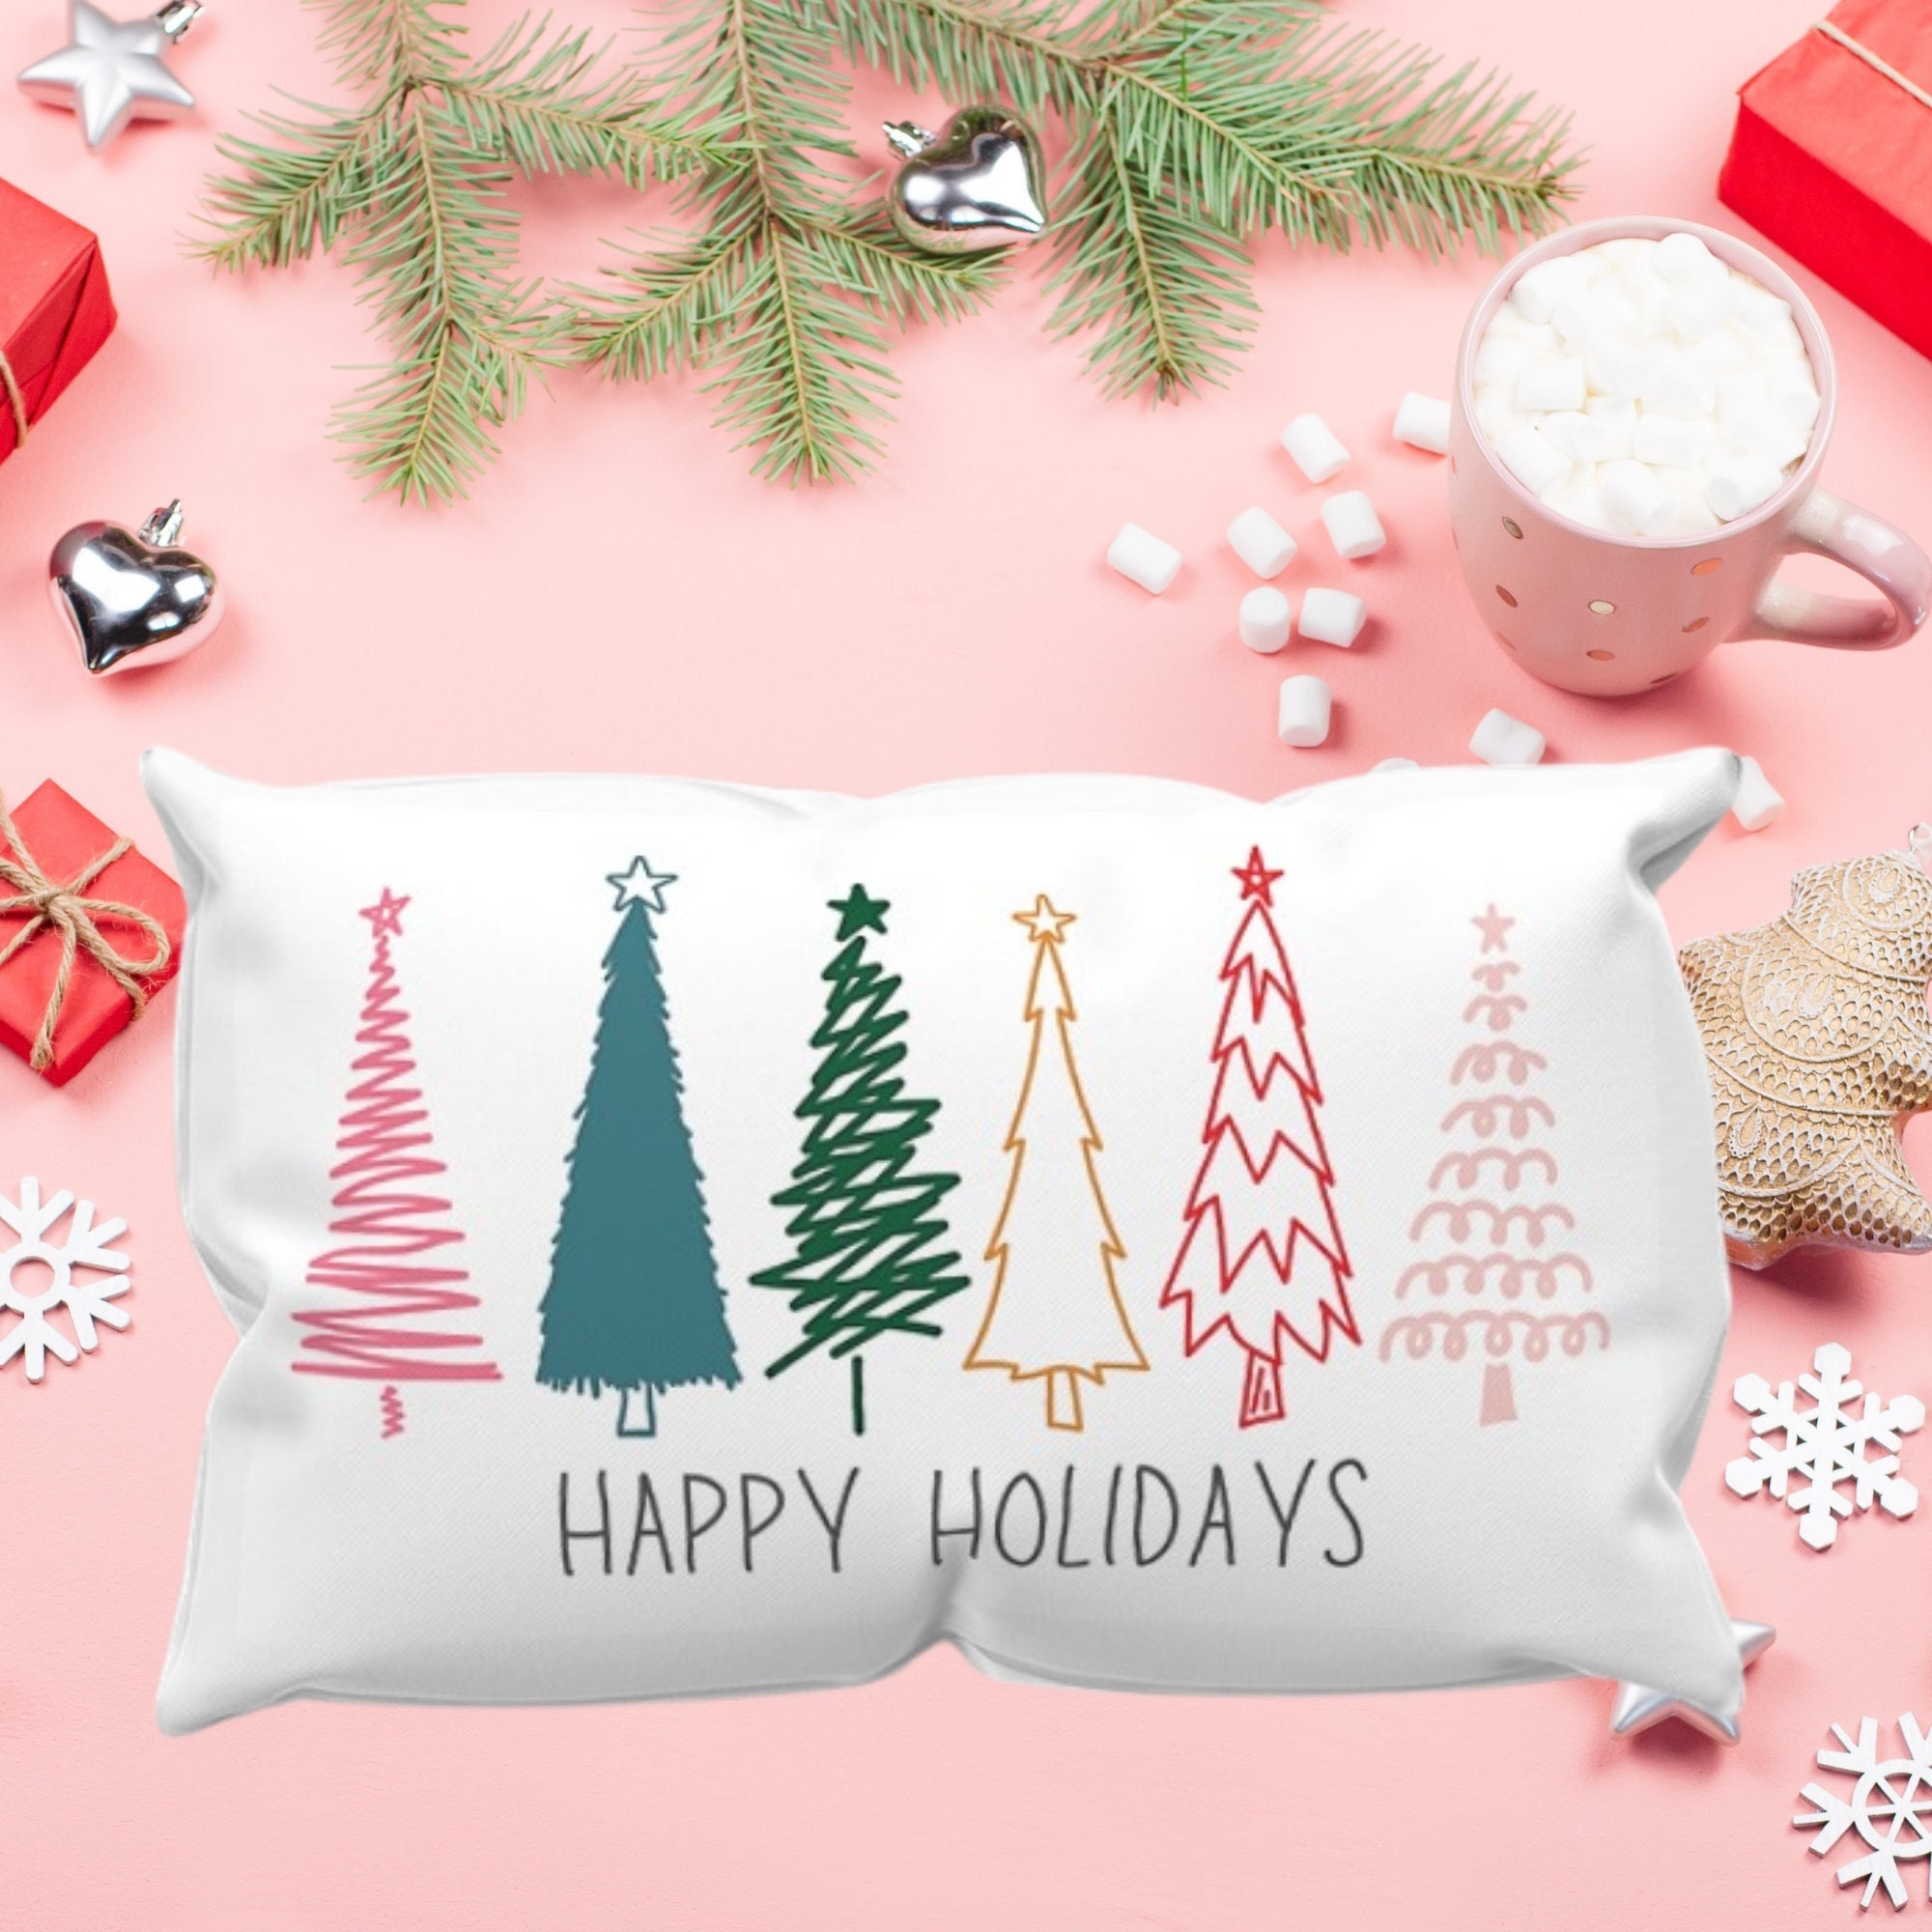  Outdoor Pillows Covers with Inserts Set of 2, Merry Christmas  Santa Hold Gift Snowflake Waterproof Pillow with Adjustable Strap  Decorative Throw Pillows for Patio Furniture Lounge Chair, 12x20 Inch :  Patio